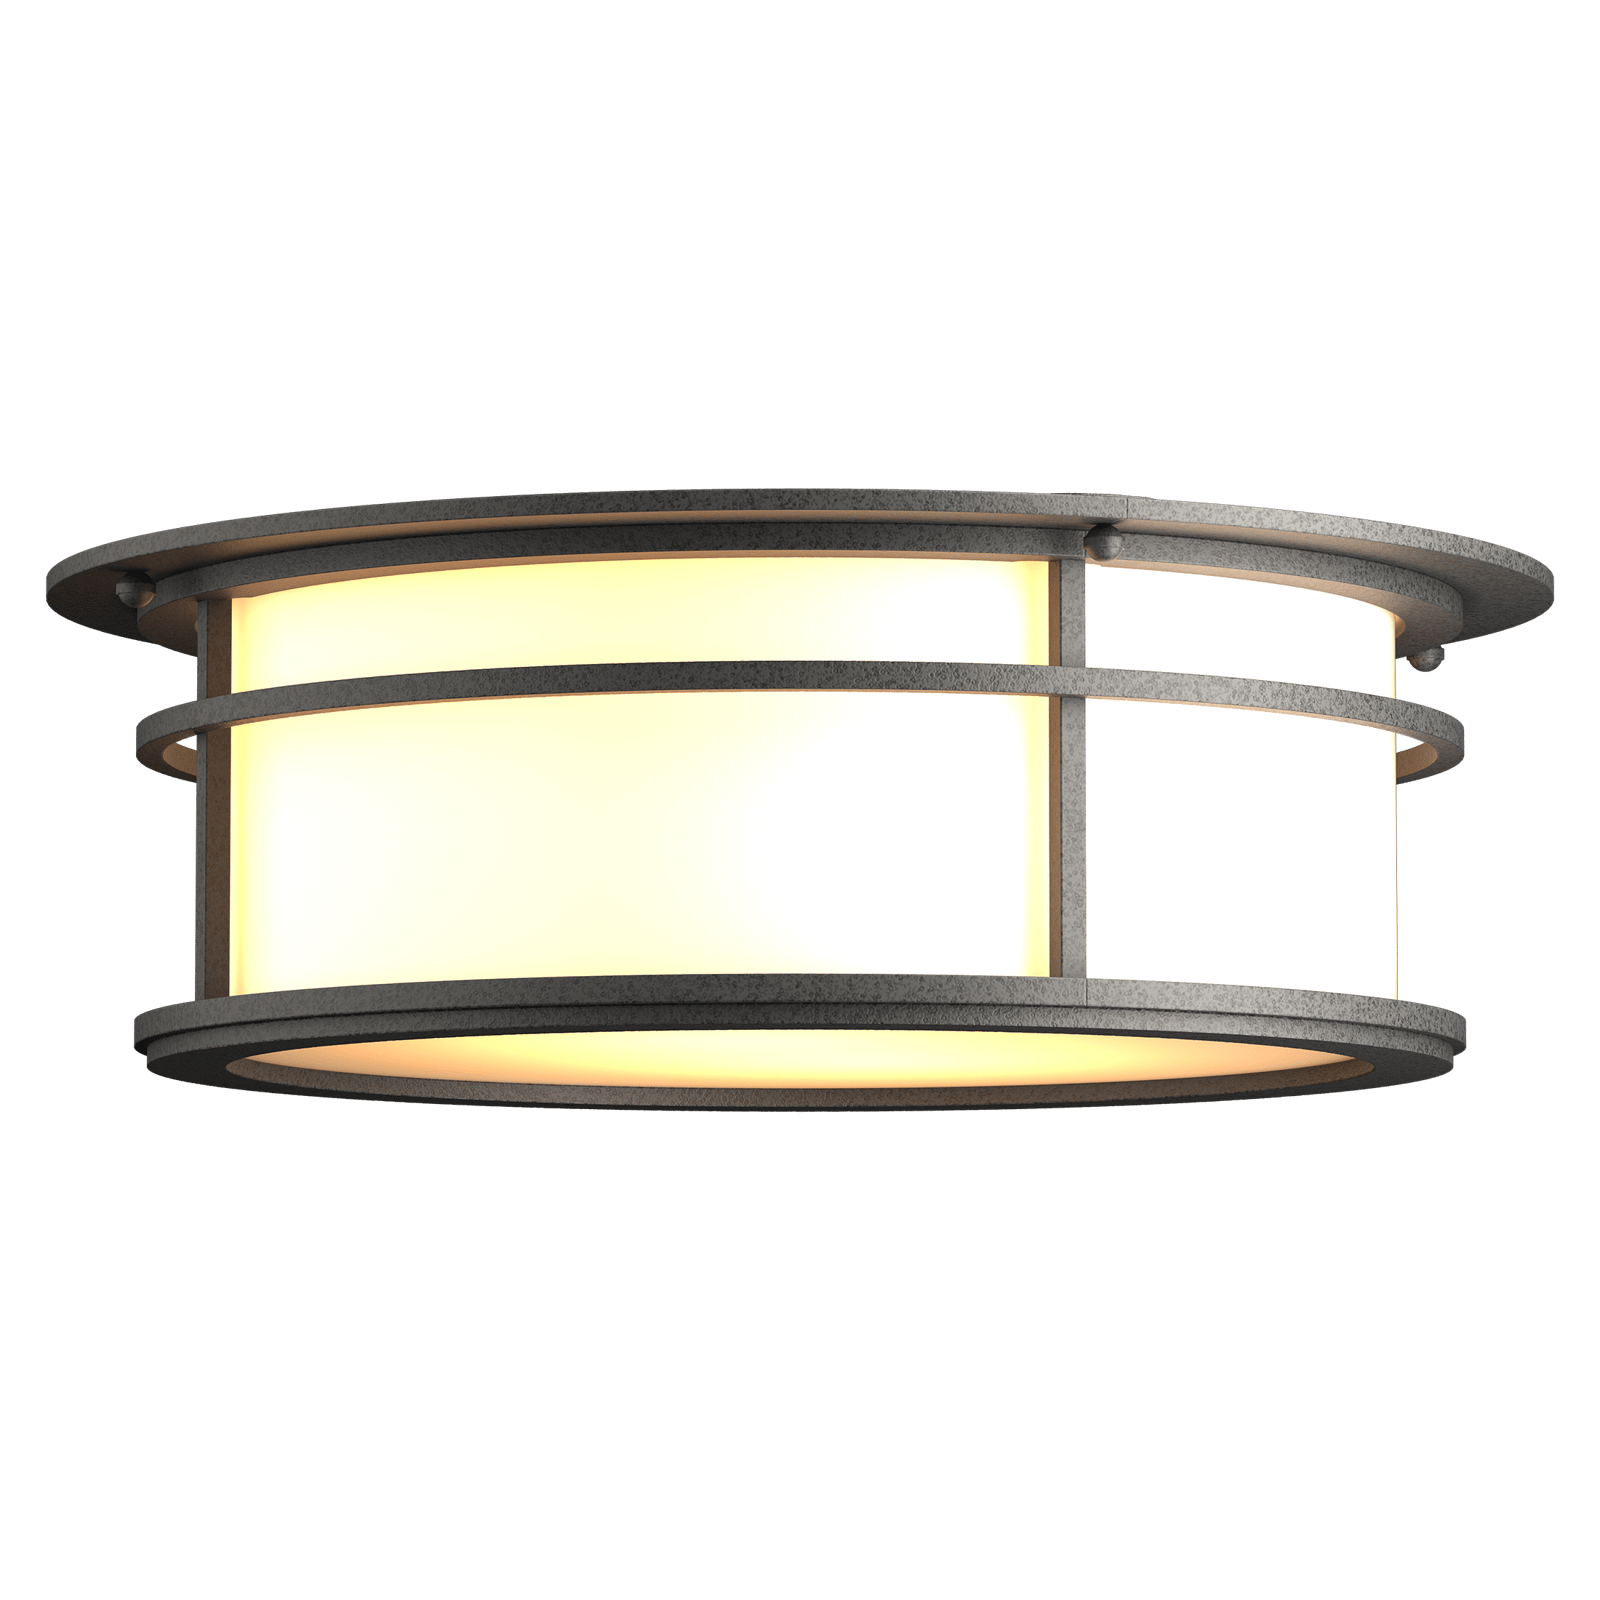 Hubbardton Forge Province Outdoor Flush Mount Outdoor l Wall Hubbardton Forge Coastal Natural Iron Opal Glass (GG) 